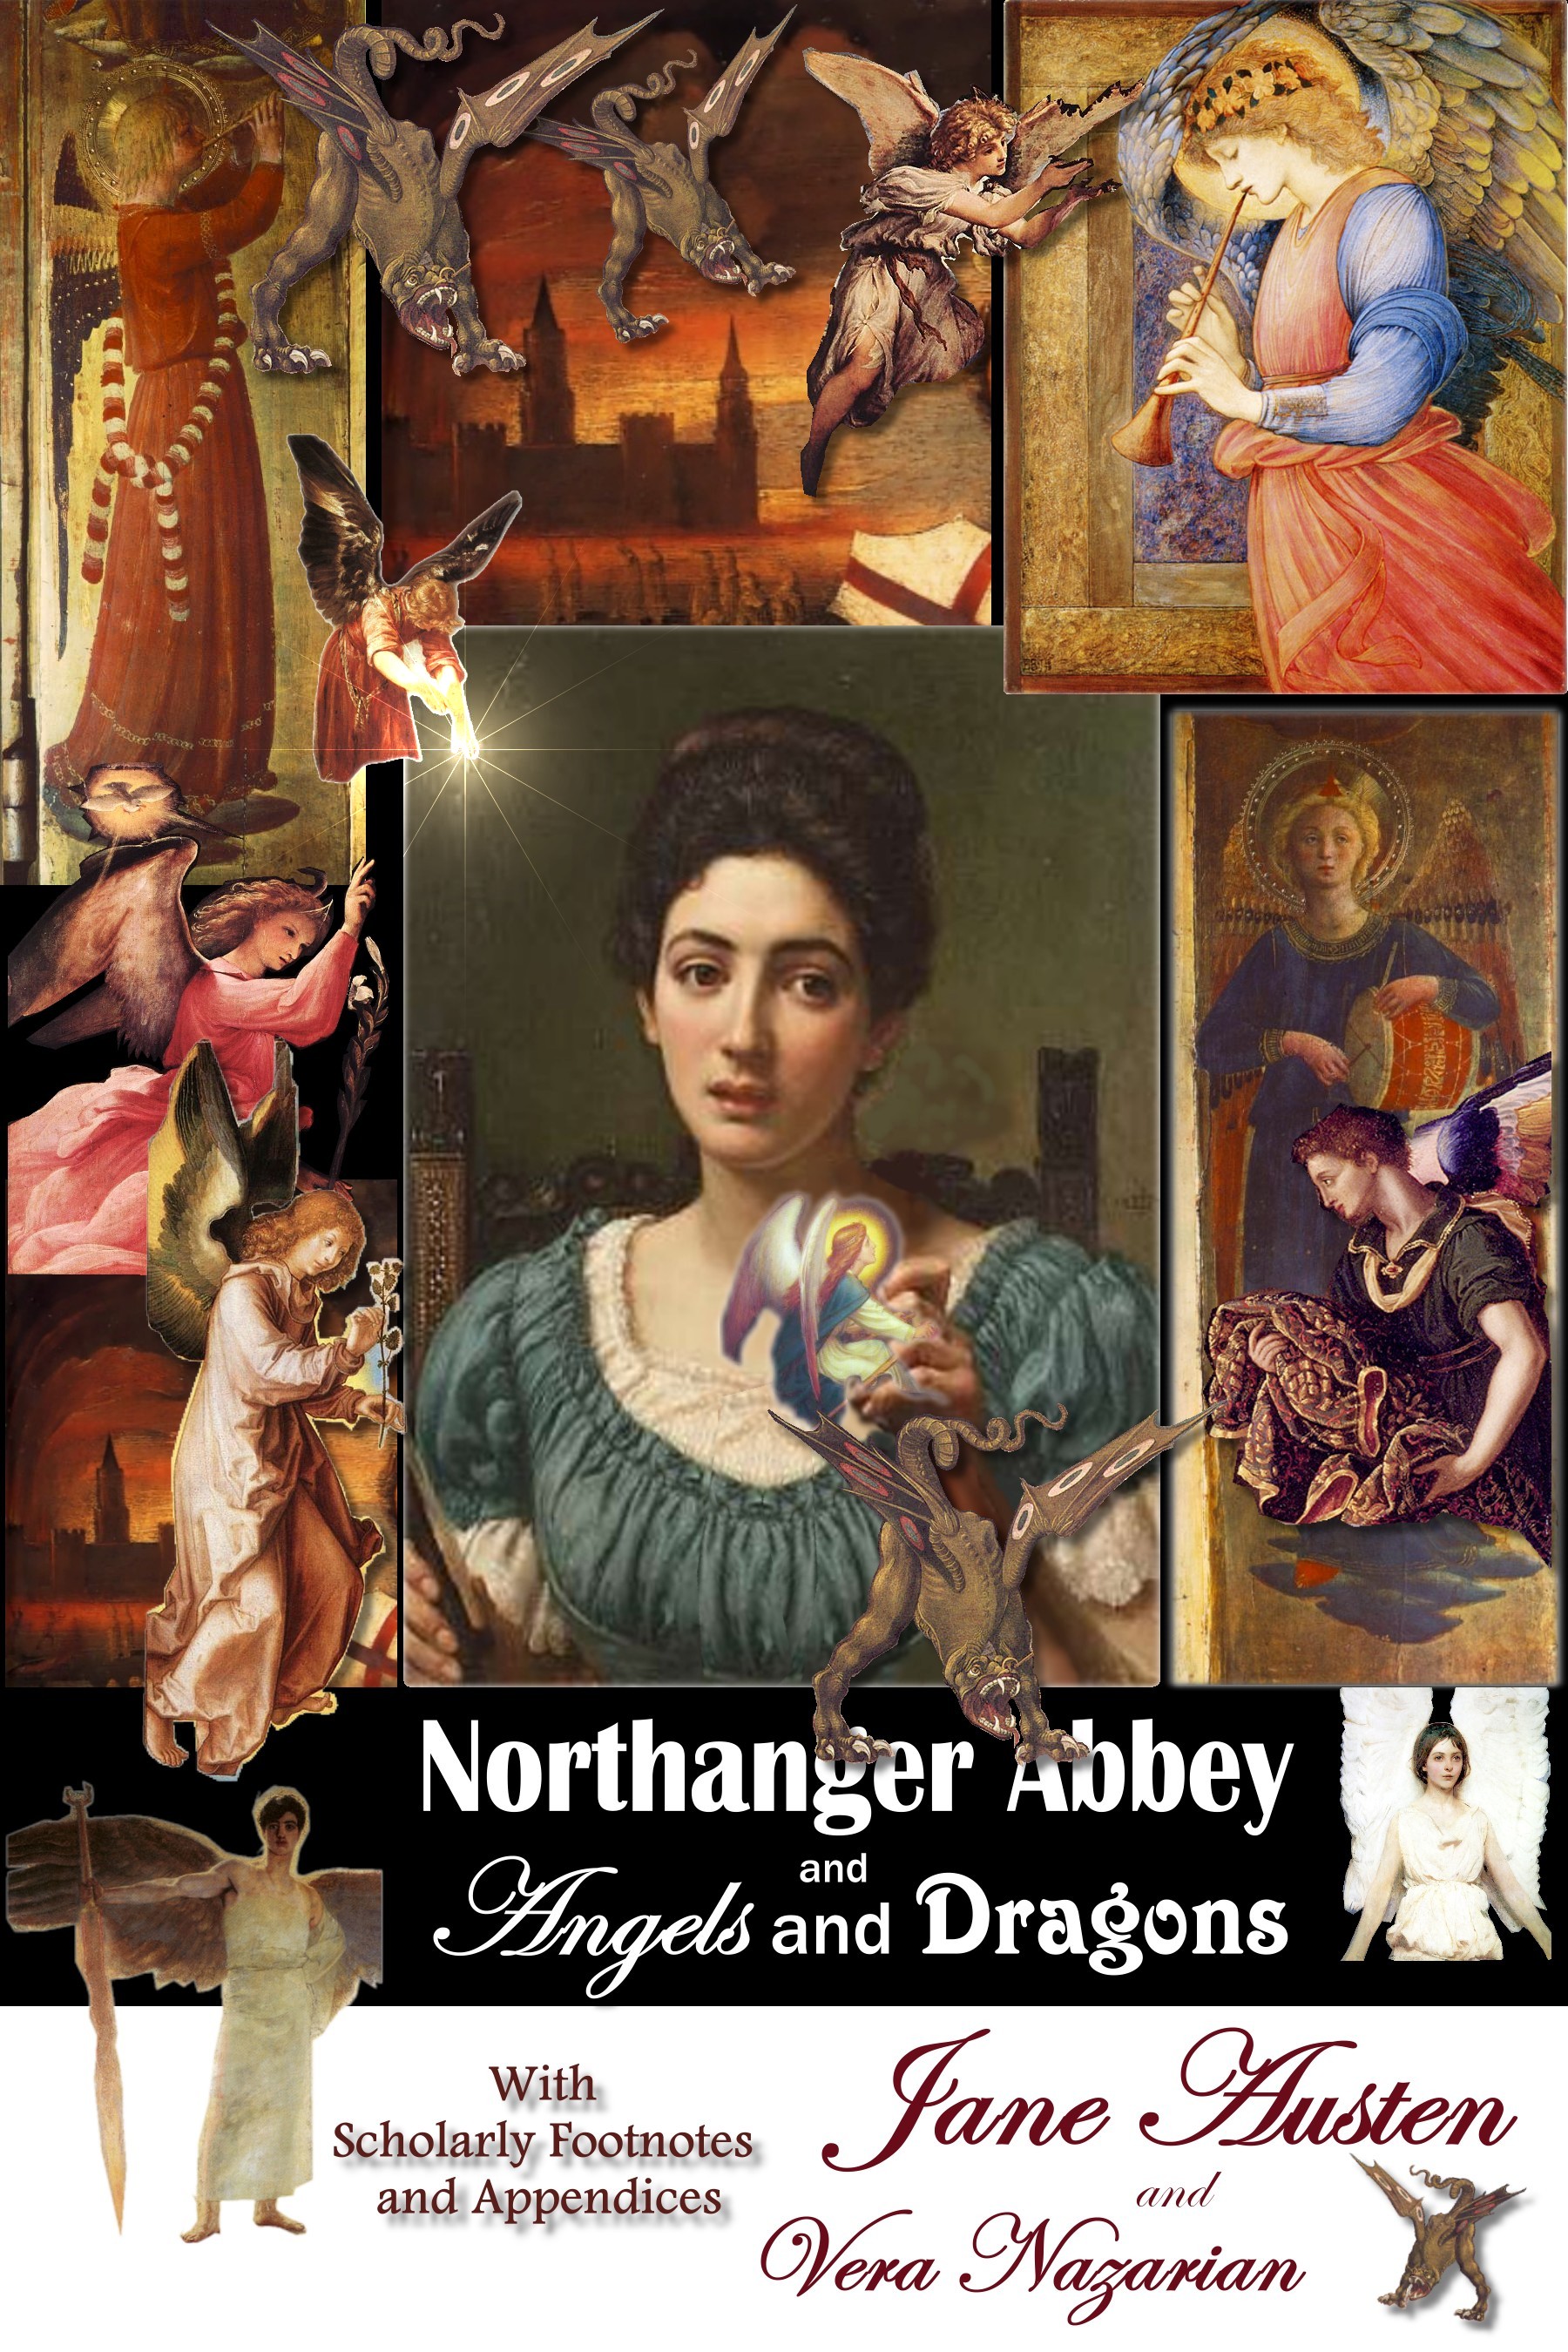 Northanger Abbey and Angels and Dragons Jane Austen and Vera Nazarian